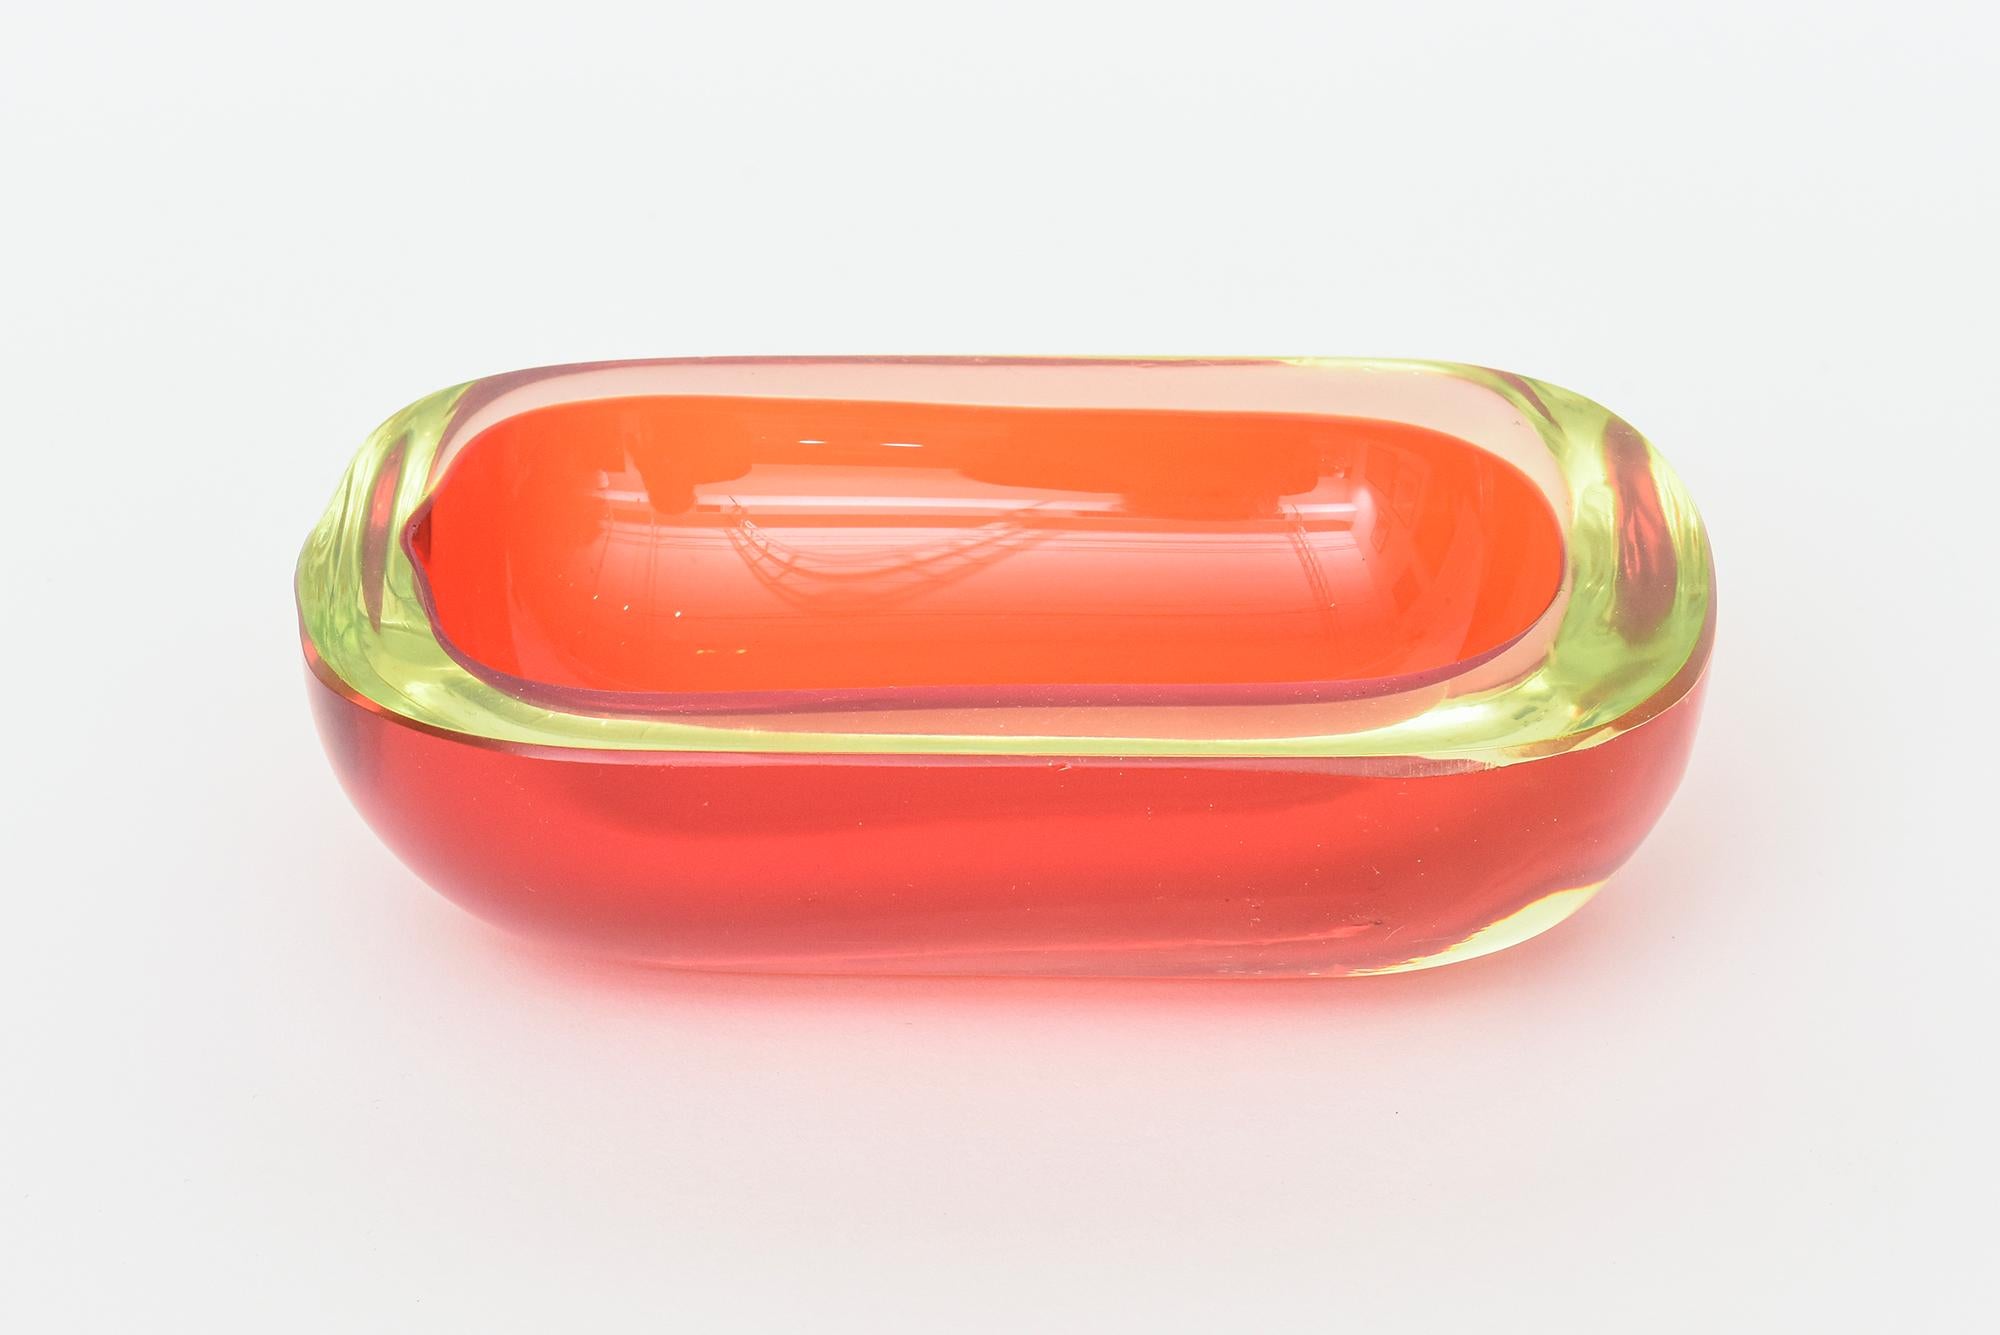 Italian Vintage Flavio Poli Murano Red and Yellow Uranium Sommerso Oblong Glass Bowl For Sale